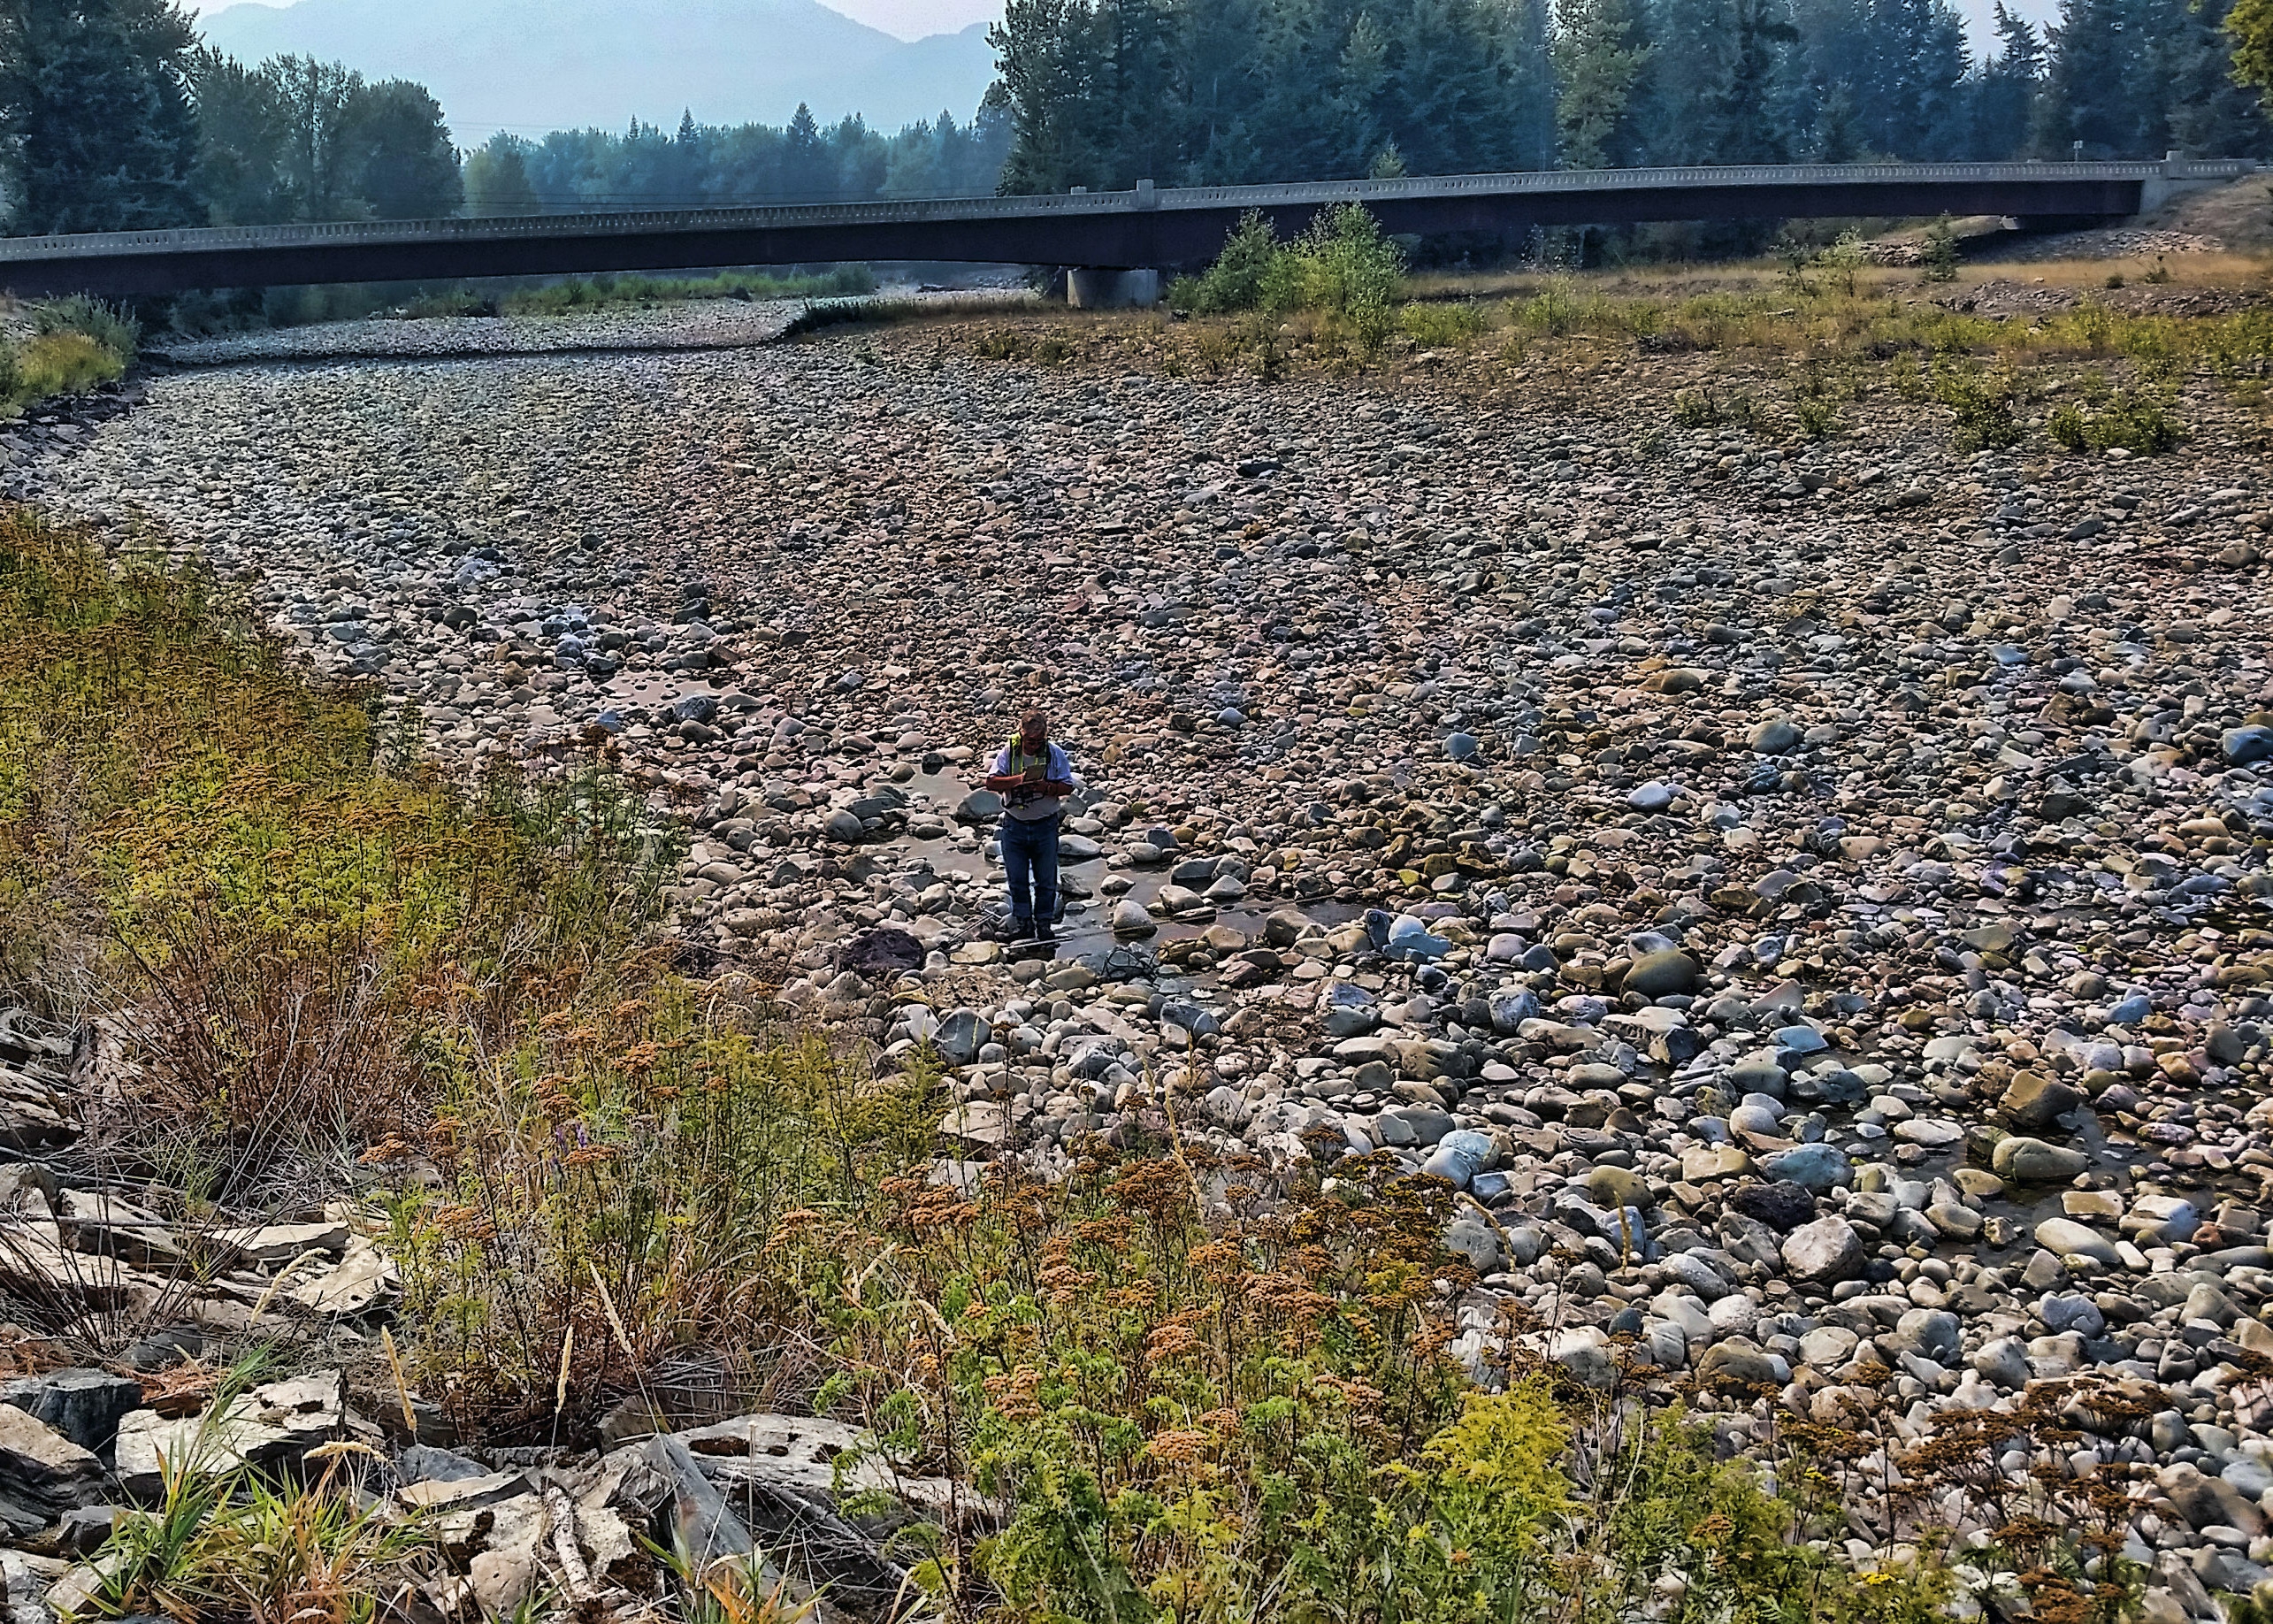 A person walks in a dry streambed